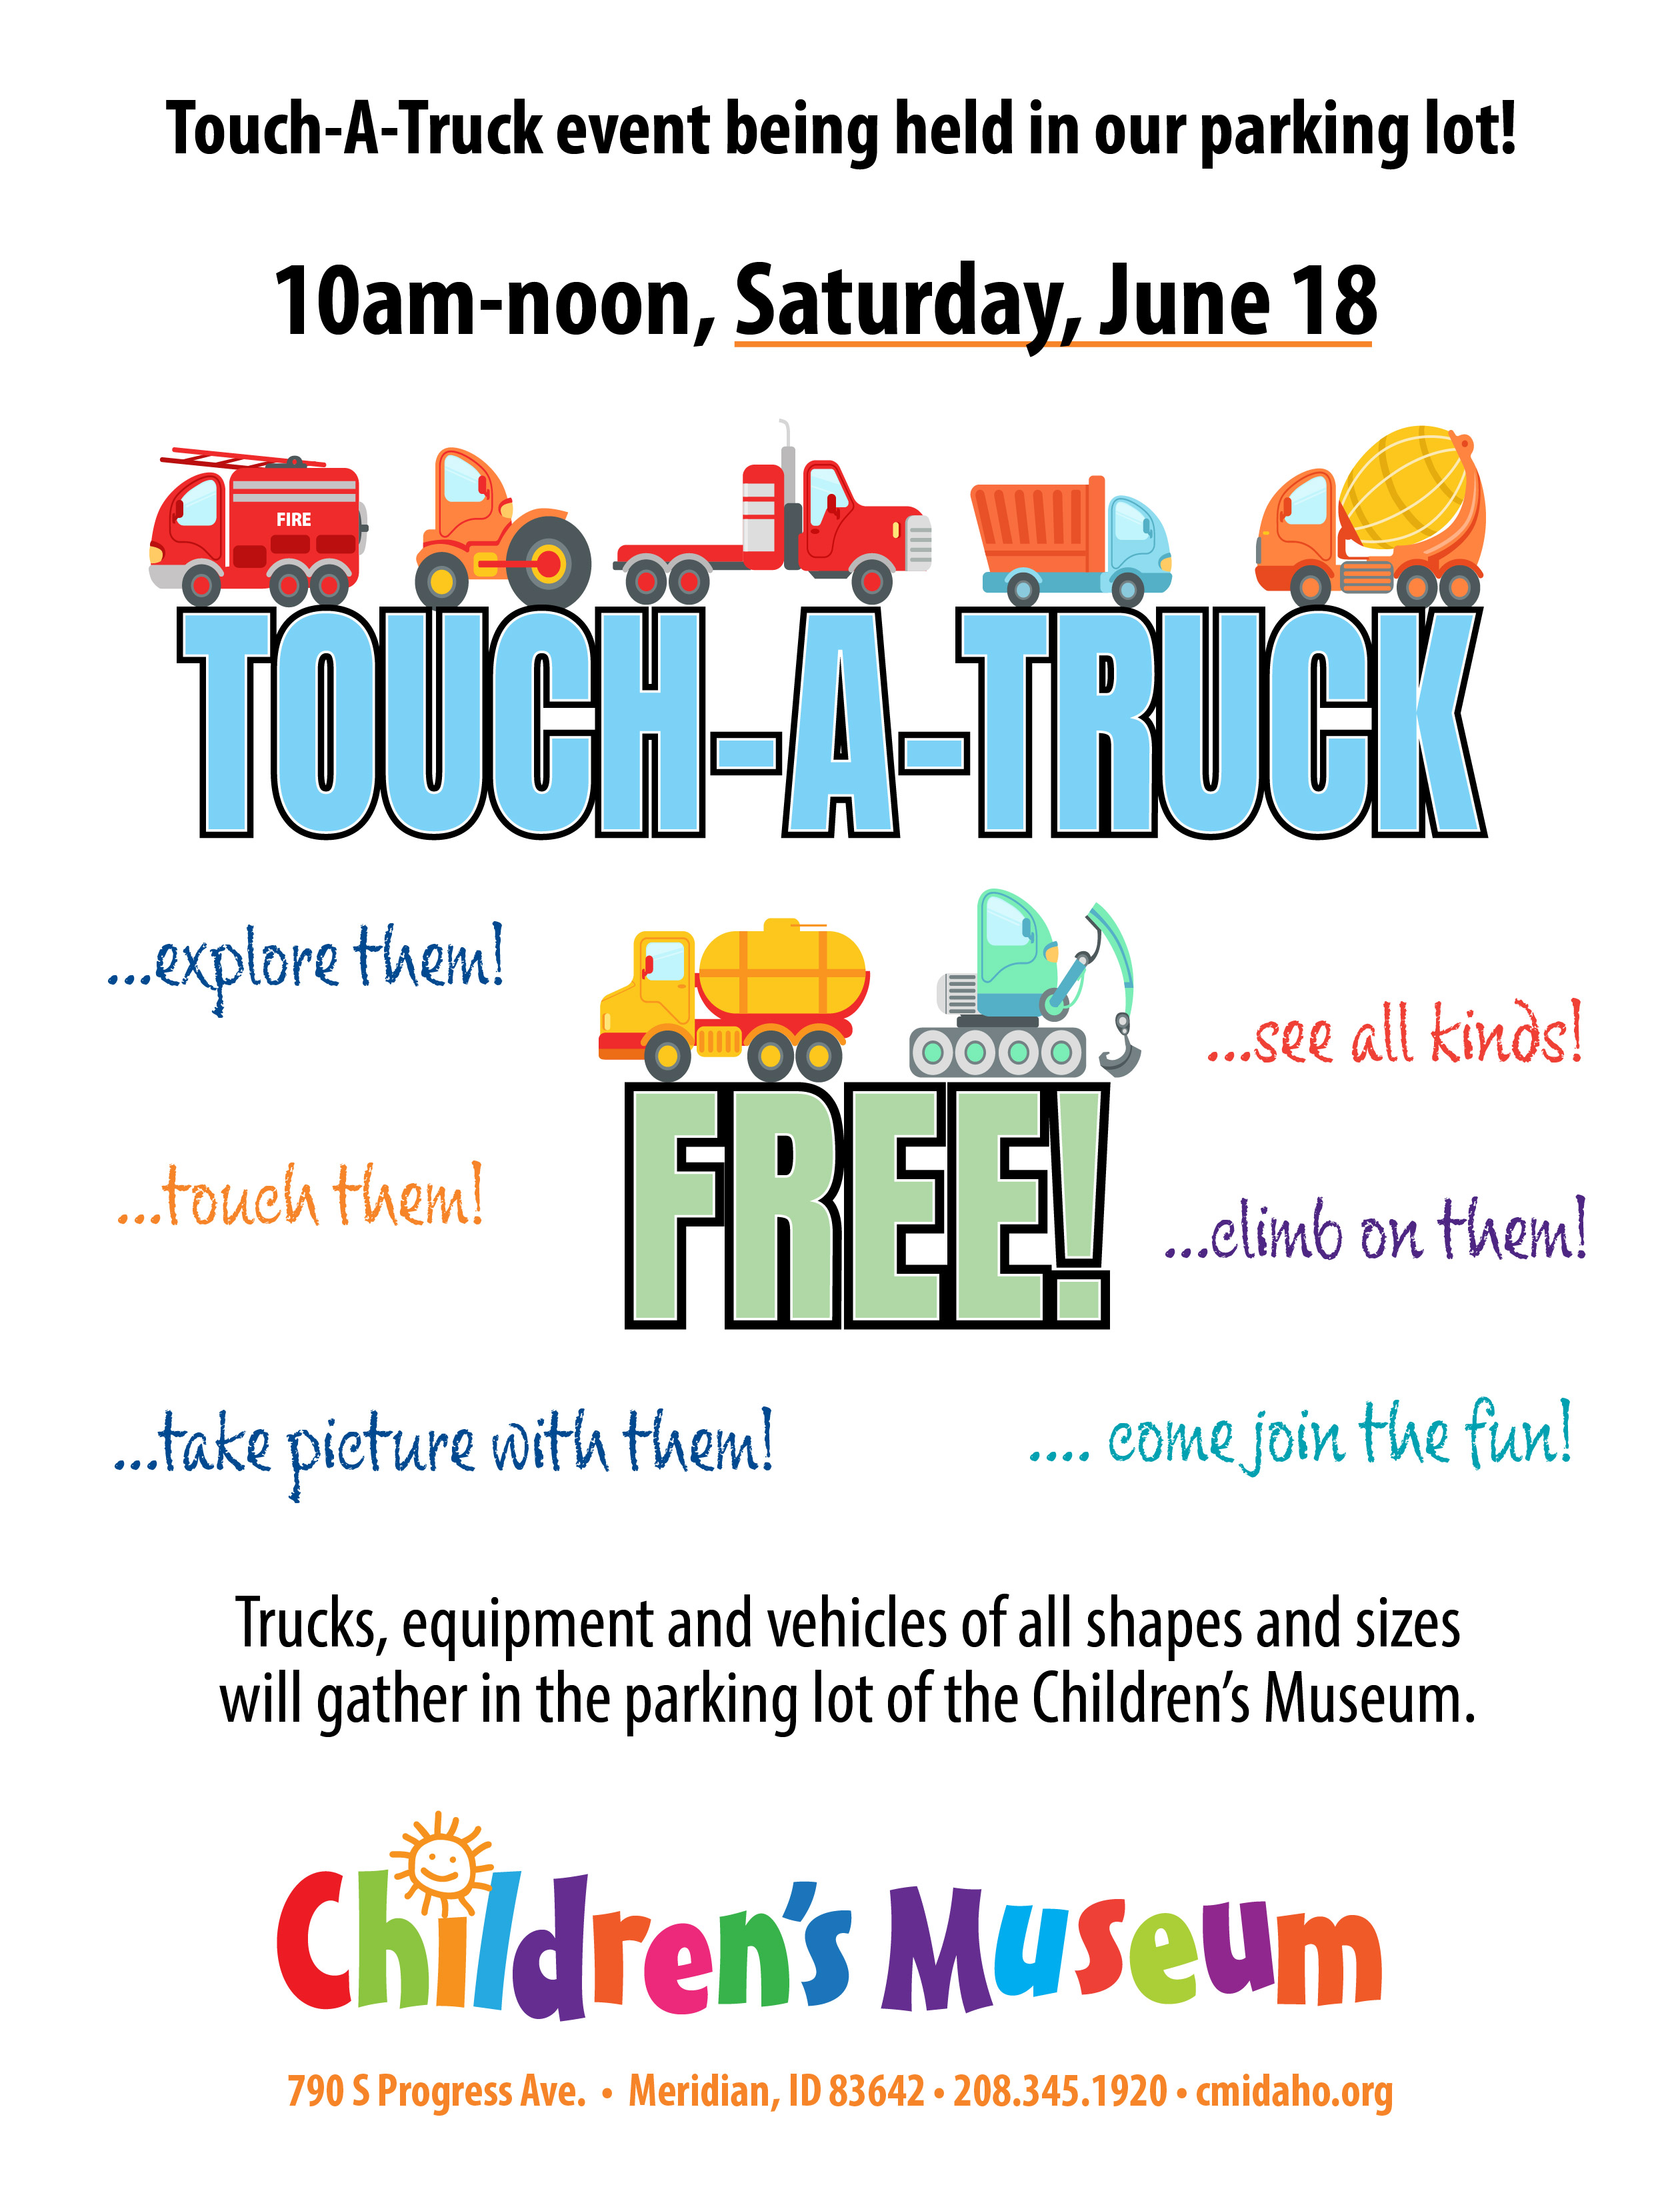 TouchaTruck FREE Parking Lot Event Children's Museum of Idaho